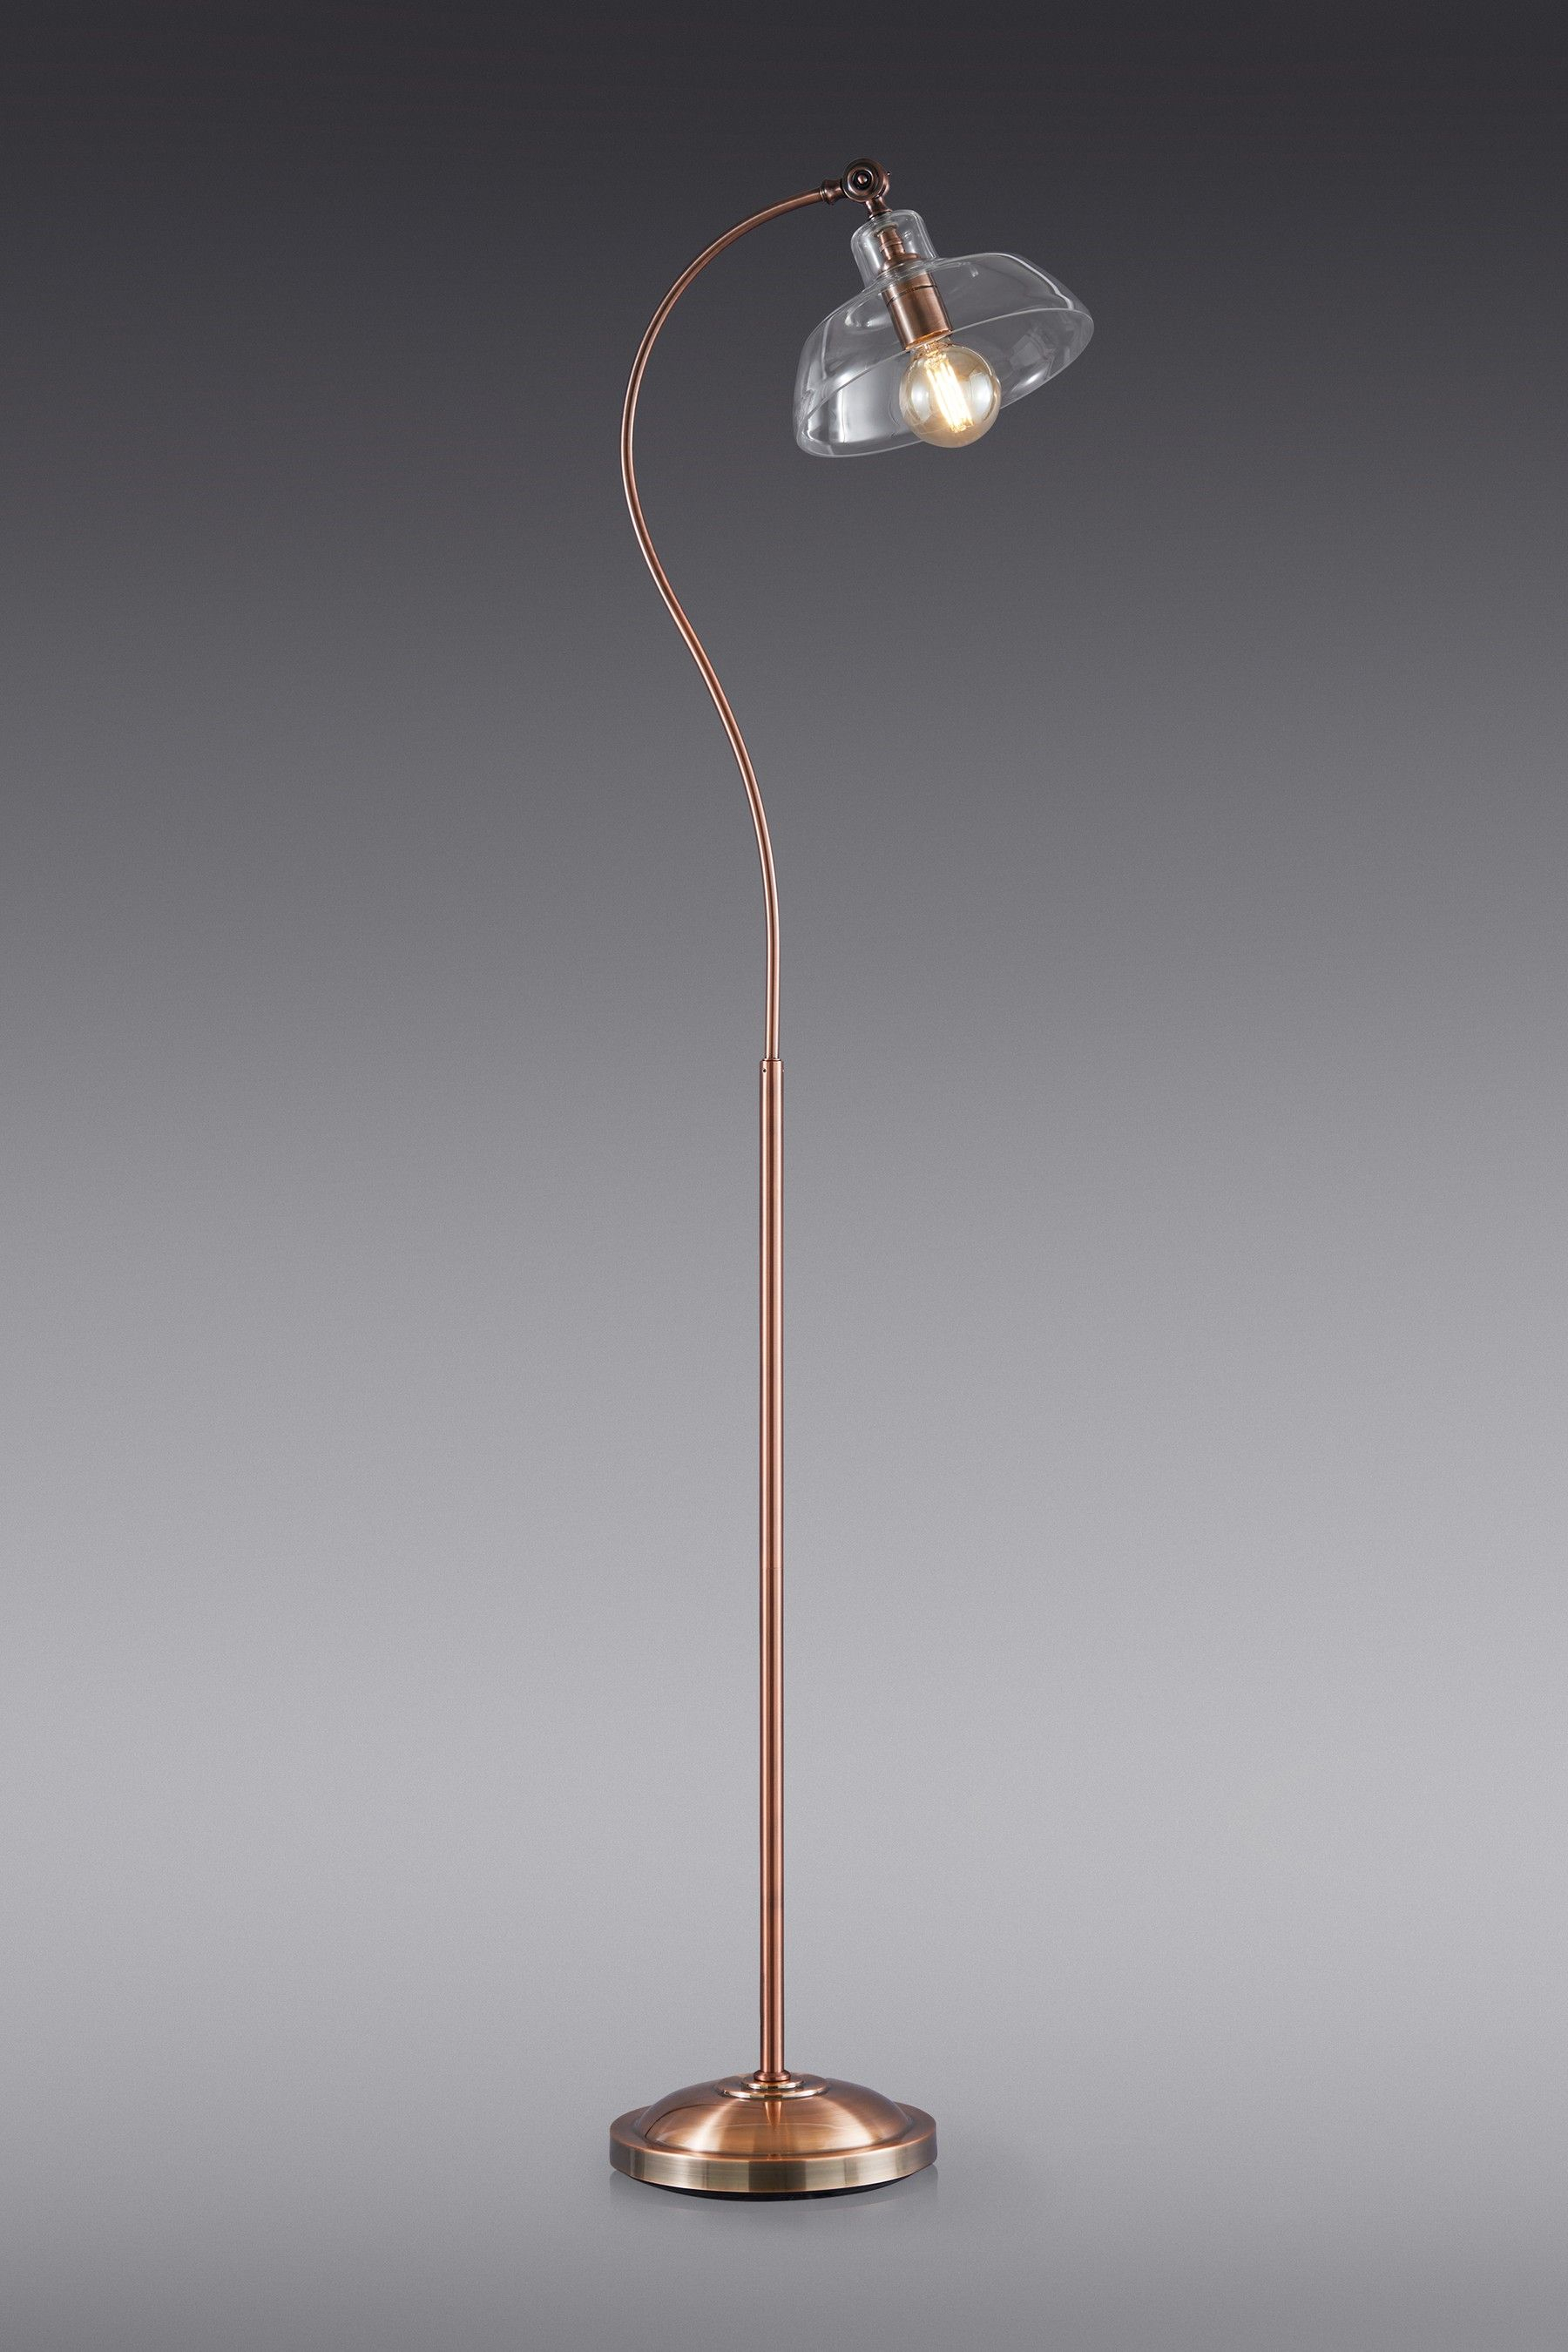 Next Stow Floor Lamp Copper Dining Room pertaining to measurements 1800 X 2700